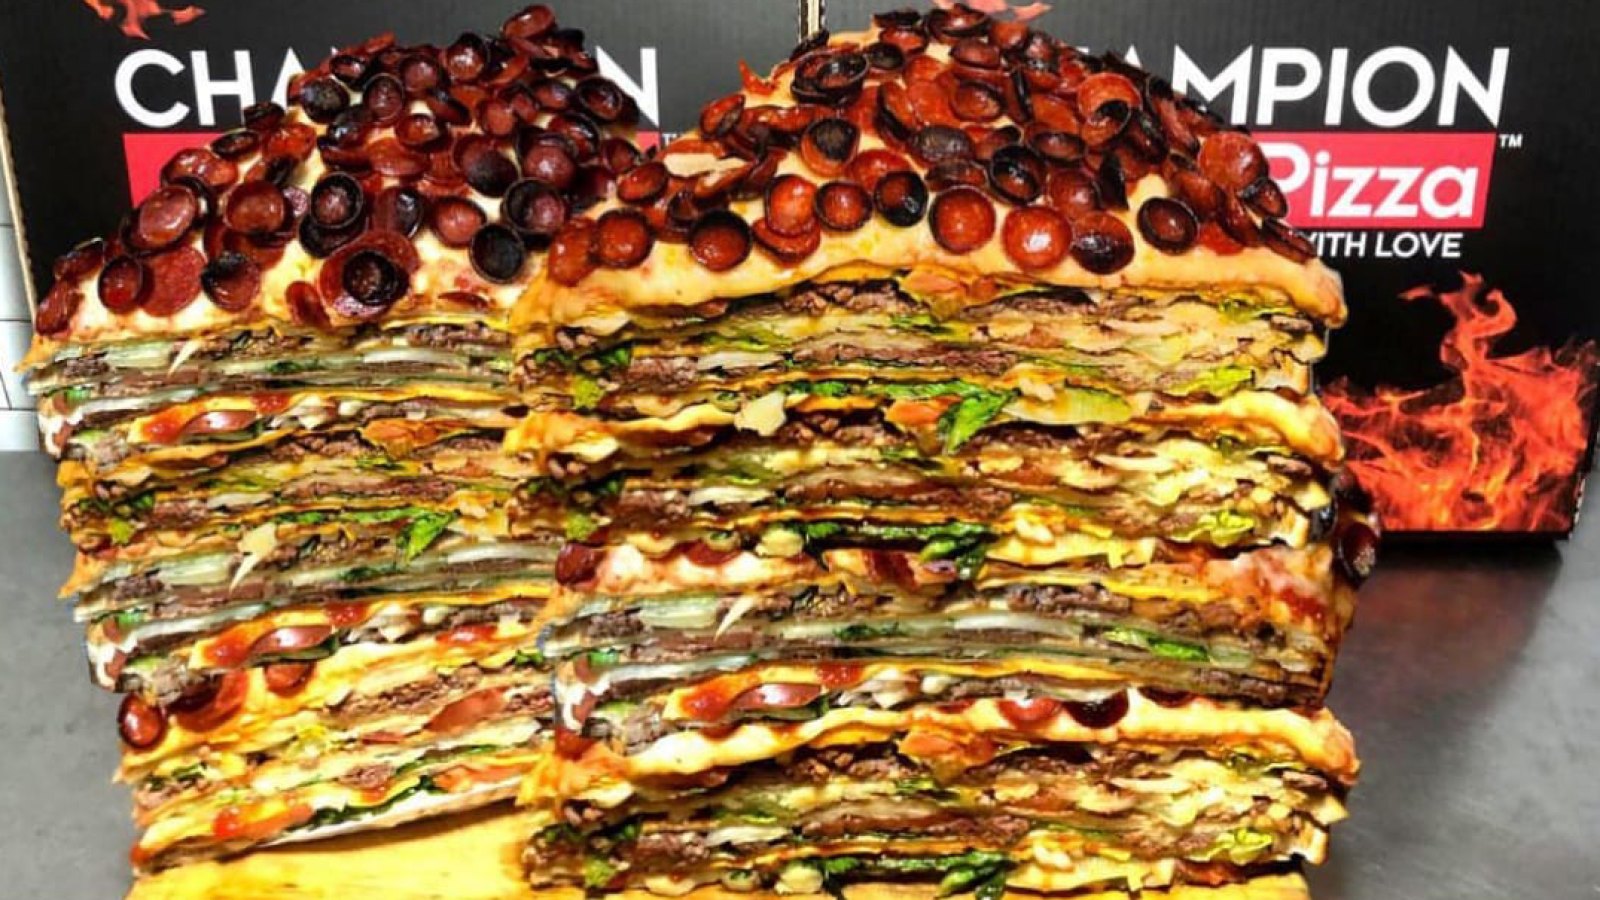 This 40-Pound Pizza Burger Is in a League of Its Own: 'A Heart Attack I'm Willing to Risk'